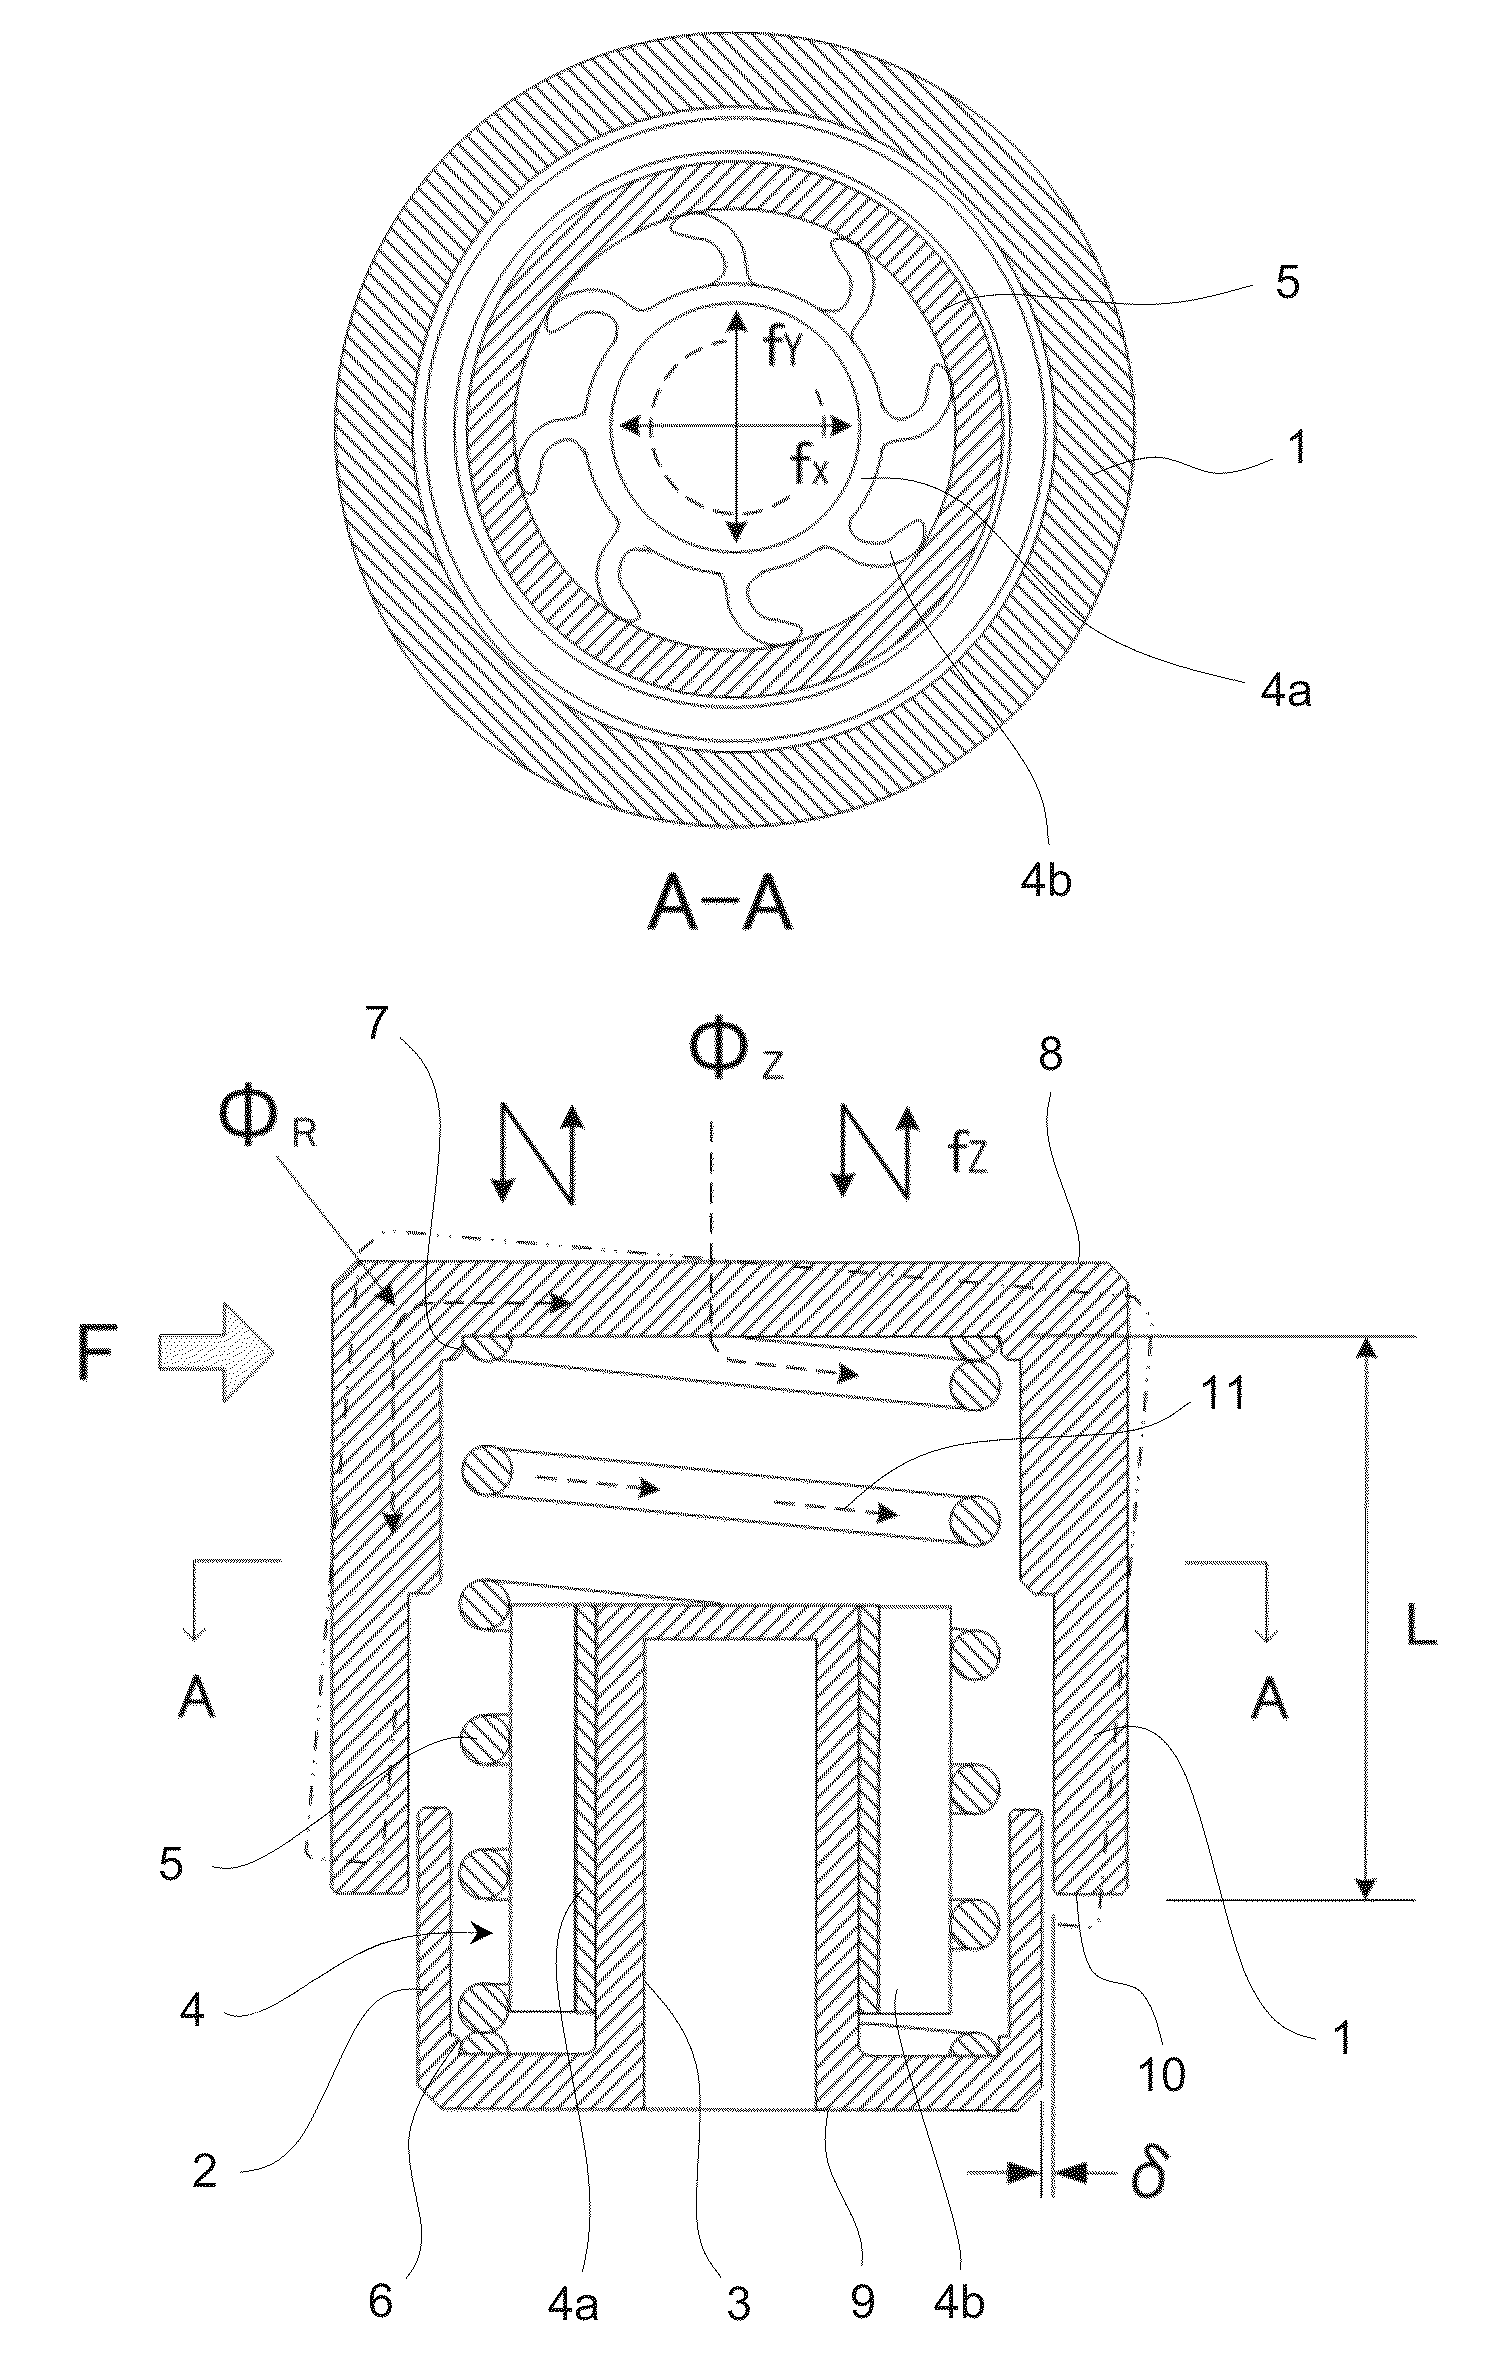 Insulator for audio and method for evaluating same